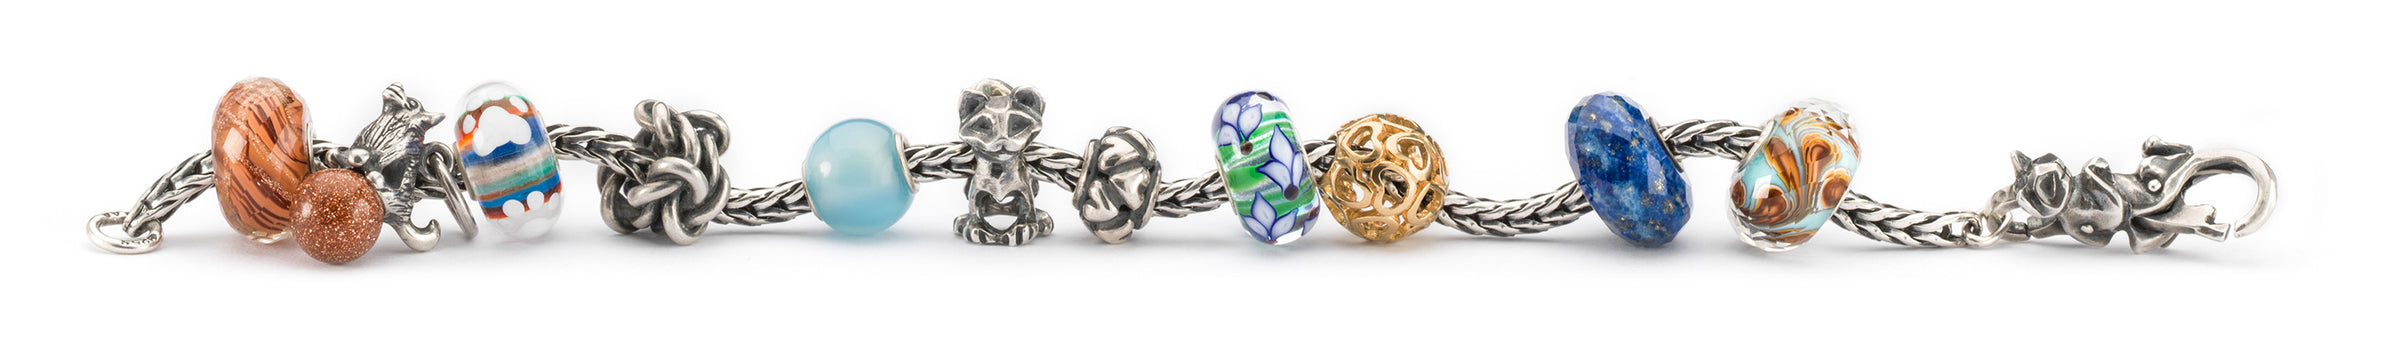 Trollbeads bracelet with a mix of beads in silver, gold and gemstones, one glass bead with a small paw print charm, and beads with cats and a dog representing the bond and affection between pets and their owners.